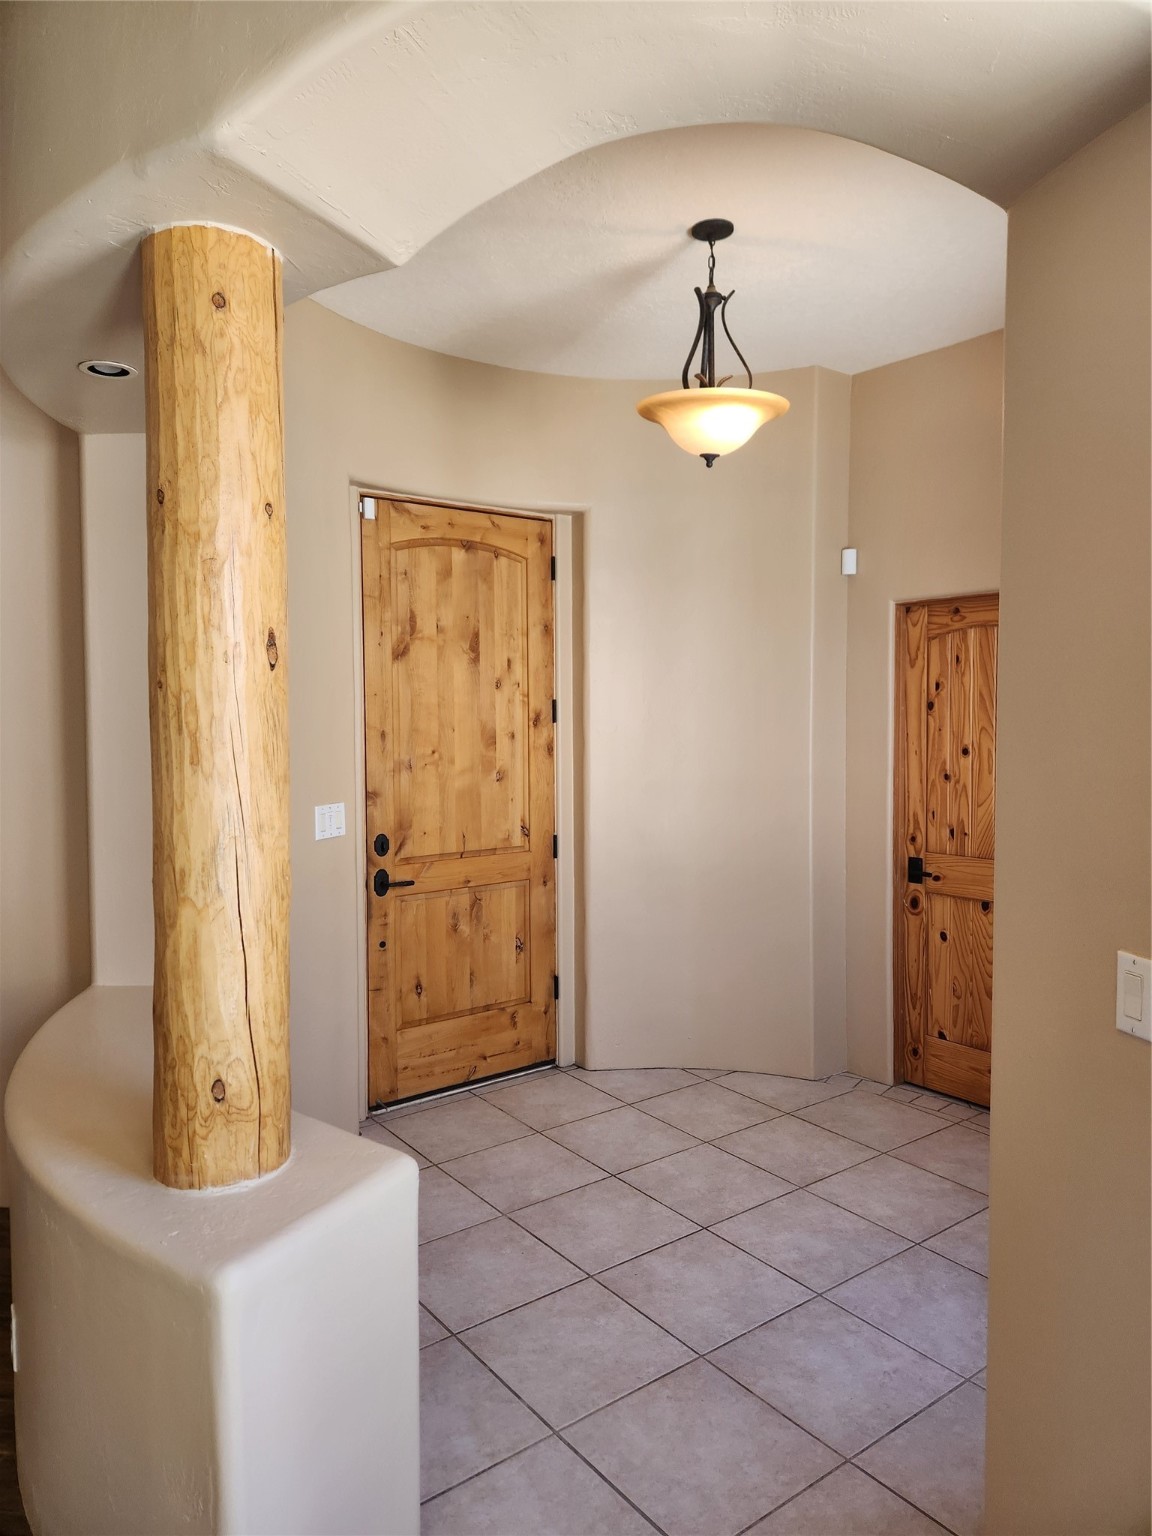 12 Madre Mountain, Santa Fe, New Mexico 87508, 3 Bedrooms Bedrooms, ,3 BathroomsBathrooms,Residential,For Sale,12 Madre Mountain,202341202